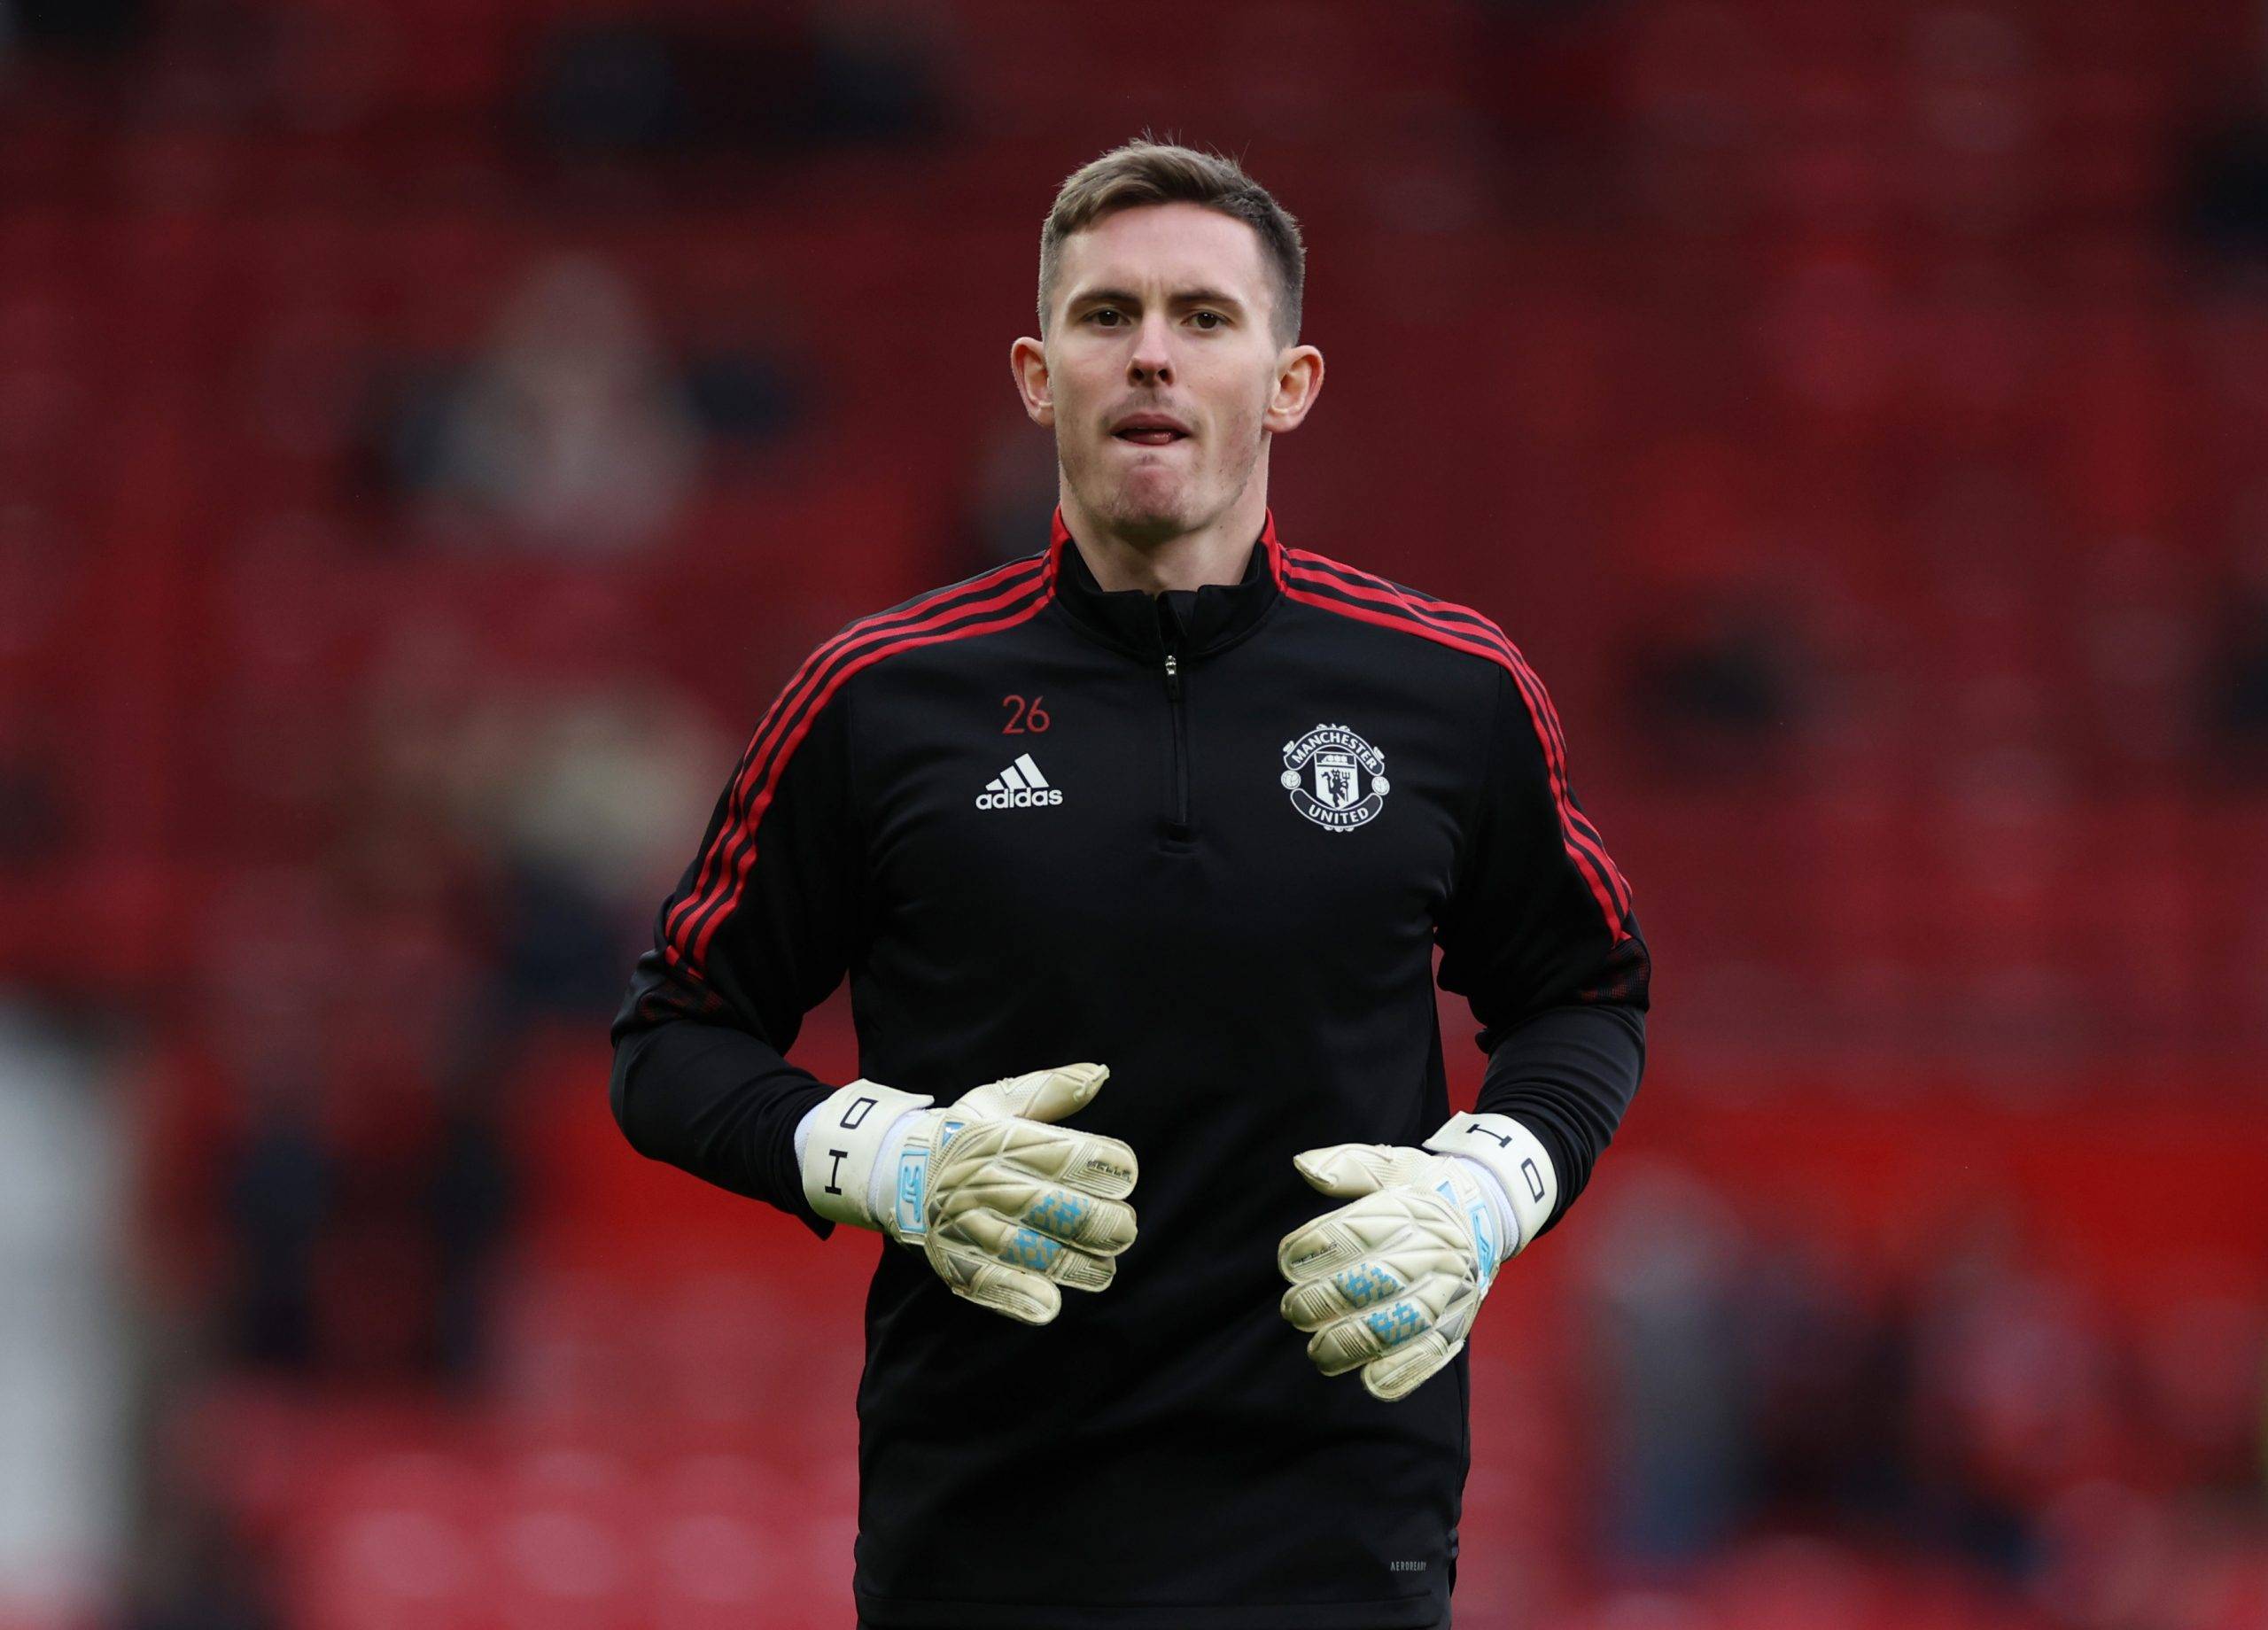 Manchester United goalkeeper Dean Henderson set to leave this summer according to reports 